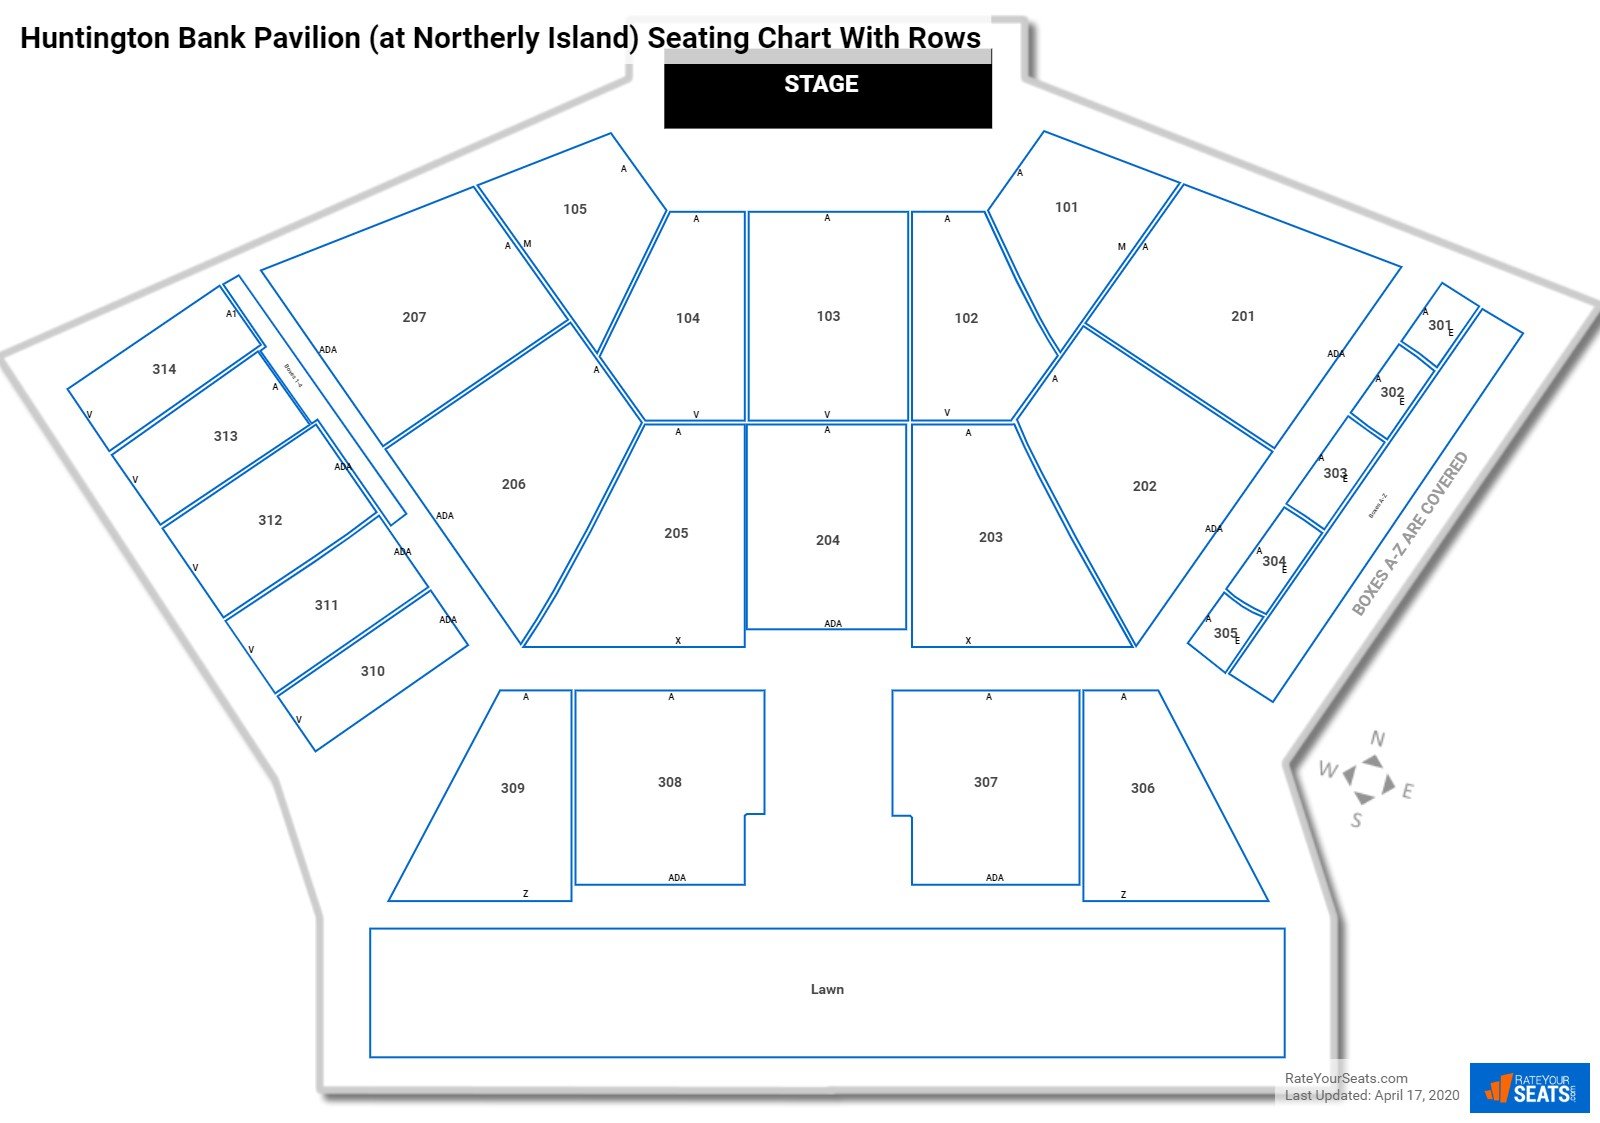 Huntington Bank Pavilion (at Northerly Island) seating chart with row numbers